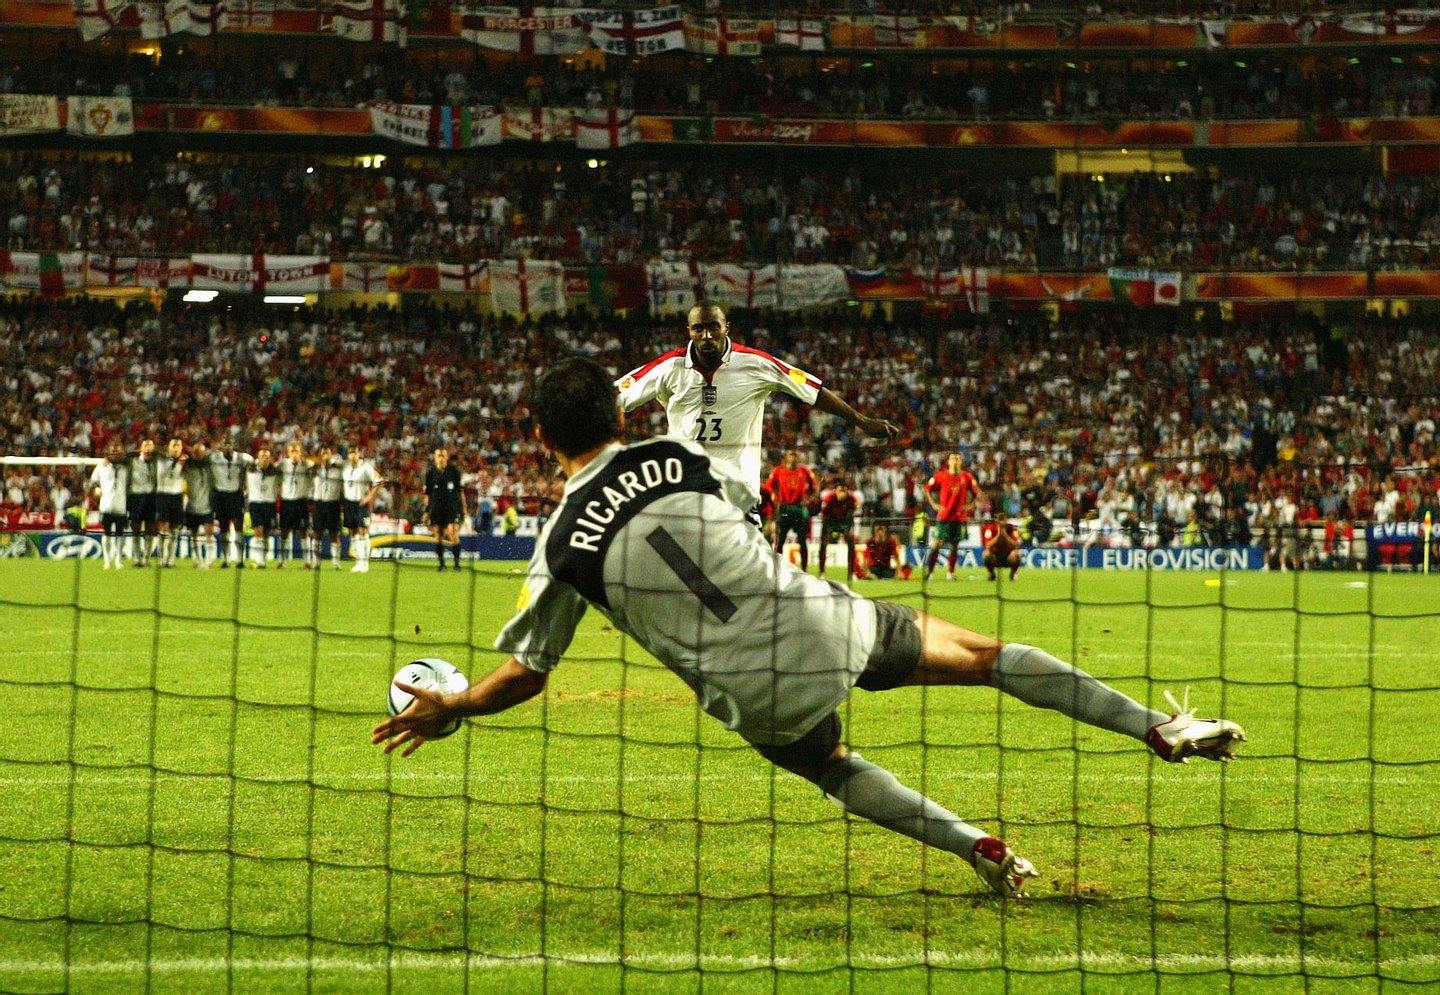 LISBON, PORTUGAL - JUNE 24: Darius Vassell of England has his penalty saved by goalkeeper Ricardo of Portugal during the UEFA Euro 2004 Quarter Final match between Portugal and England at the Luz Stadium on June 24, 2004 in Lisbon, Portugal. (Photo by Shaun Botterill/Getty Images)